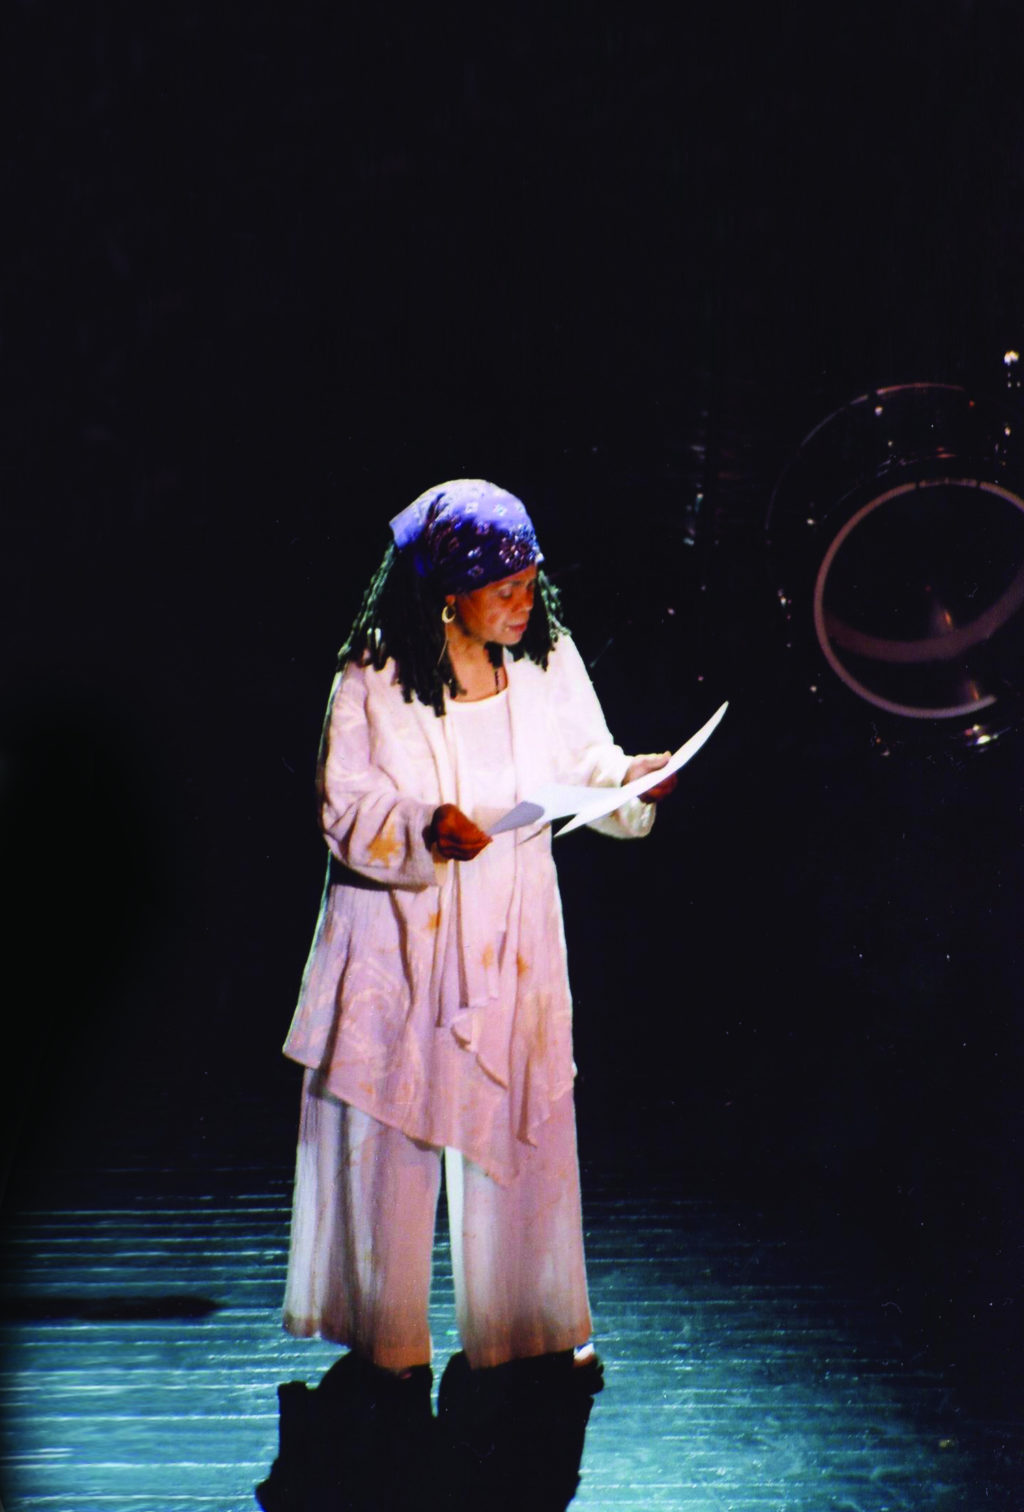 Sonia Sanchez, wearing white and a purple hair wrap, is illuminated on stage as she reads off of a paper to the audience